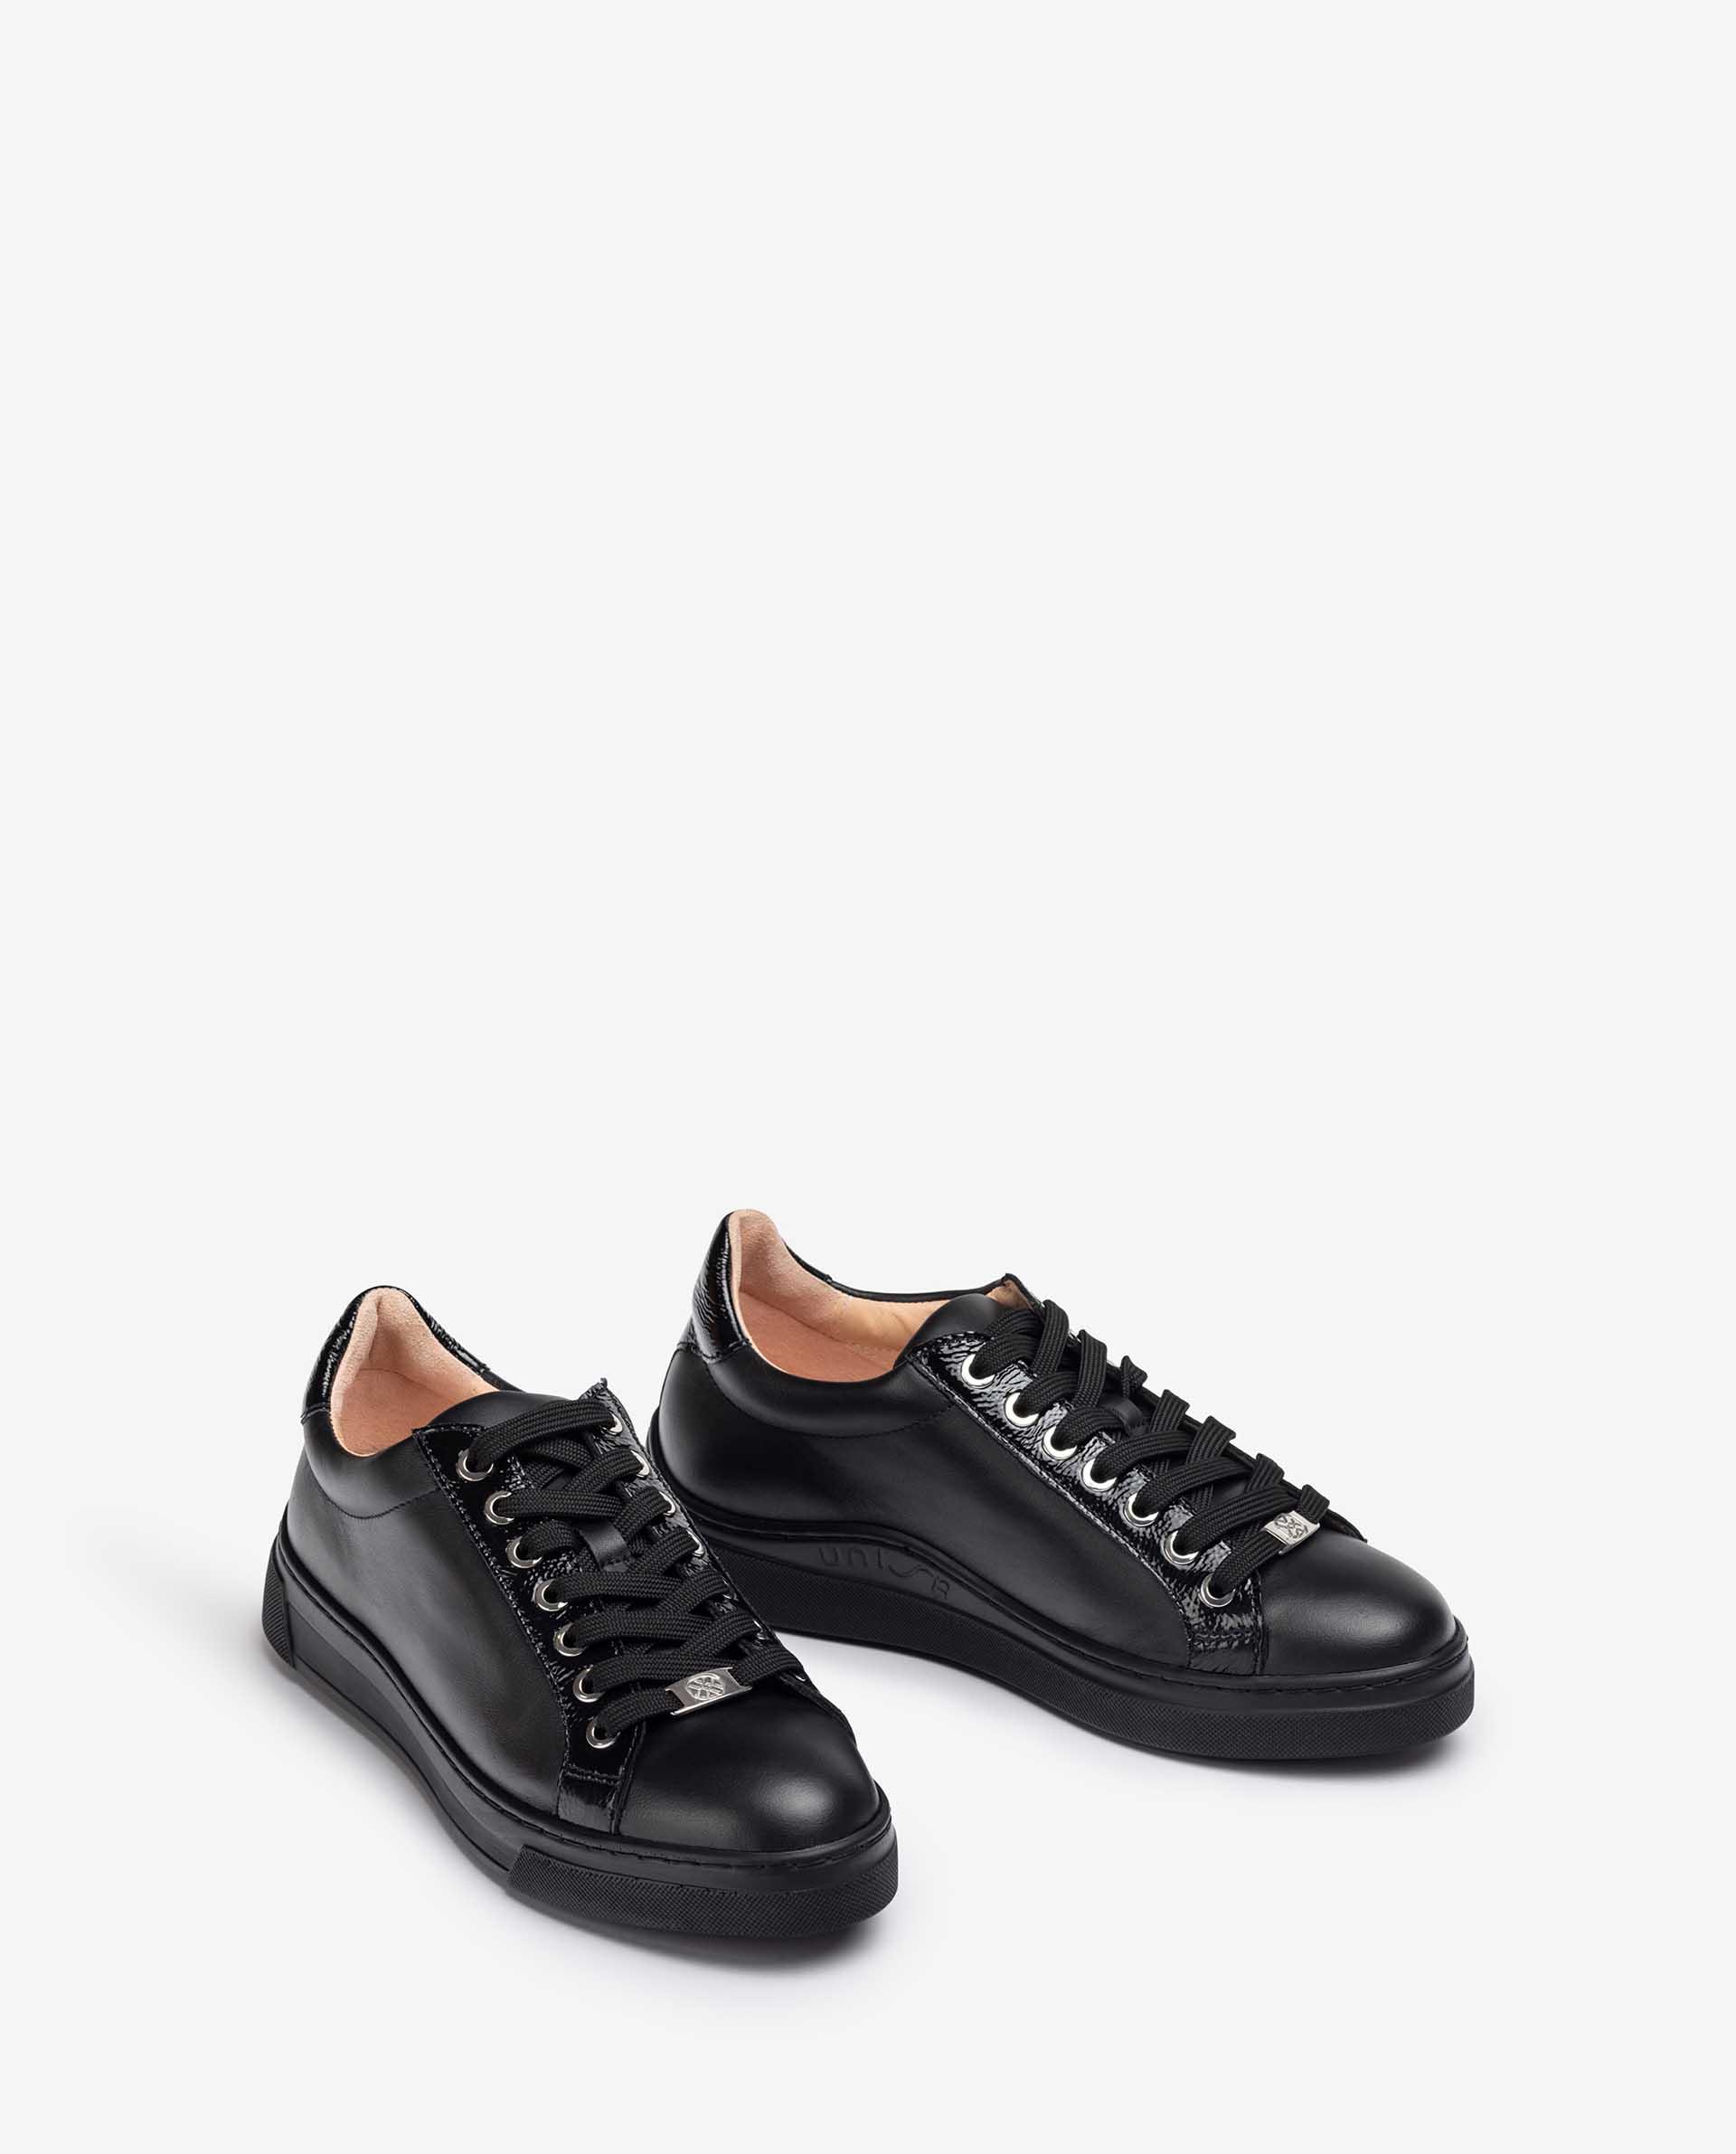 UNISA Contrast leather sneakers FRANCI_F21_NF_PCR 4